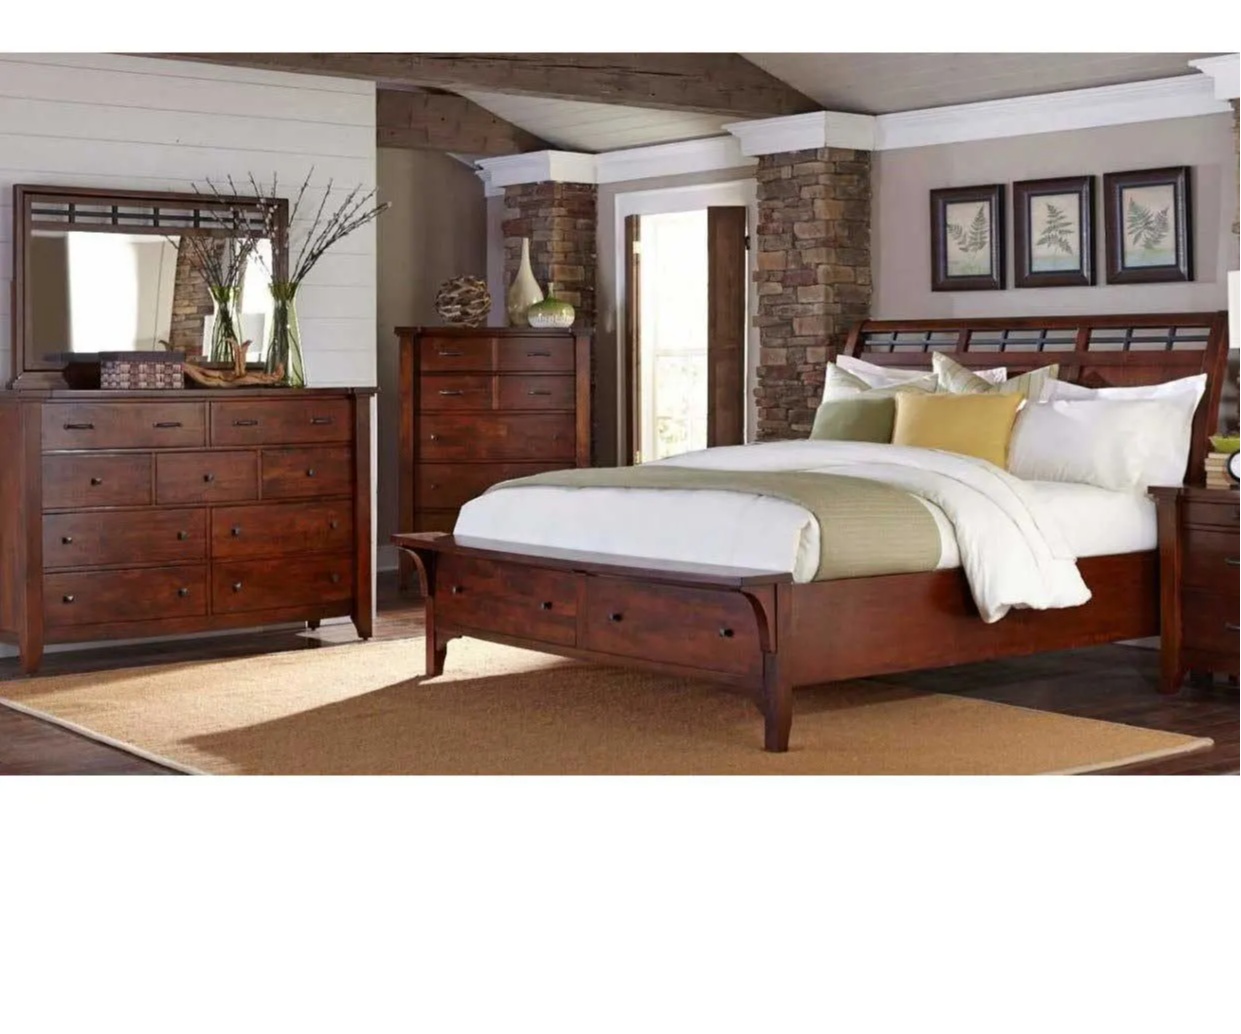 Ranking Bedroom Set Quality From Good, Better, & Best (Bedroom Collection Reviews & Ratings)